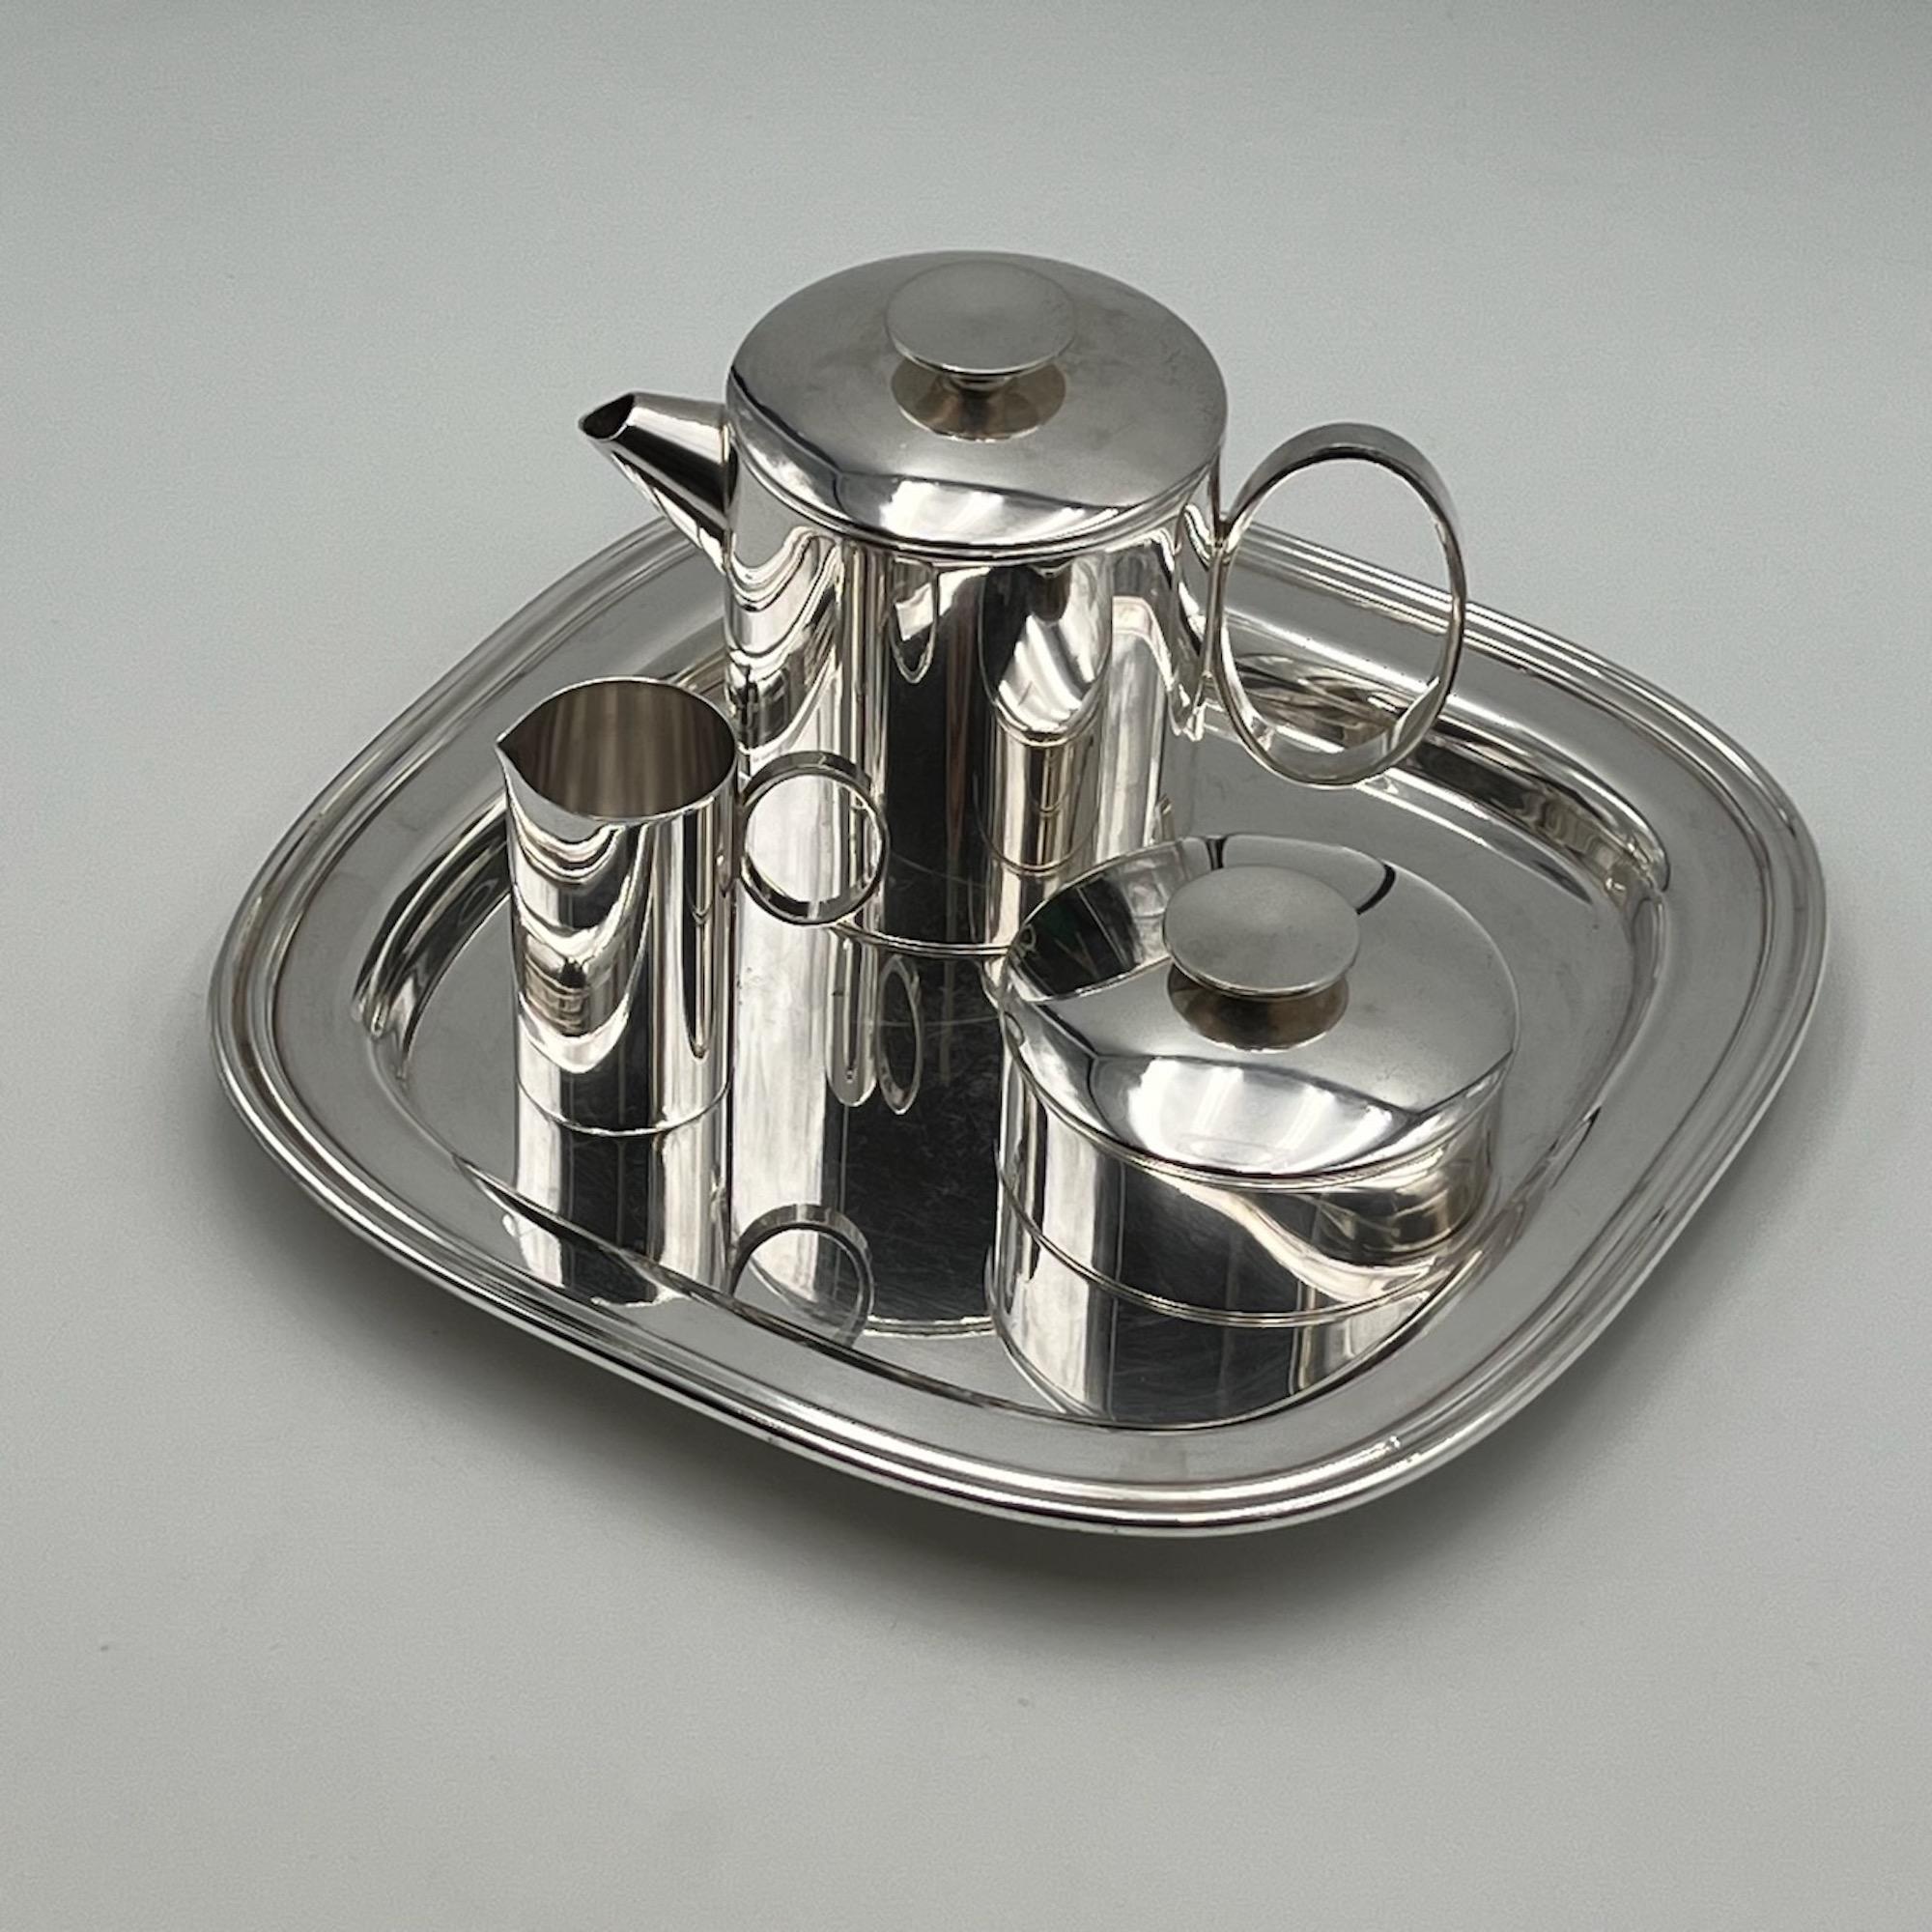 Amazing and rare vintage tableware set designed by the renowned modernist Italian designer Lino Sabattini for world-famous silversmith Christofle Paris.

This rare and highly prized silver plated set is part of the iconic Gallia collection, born